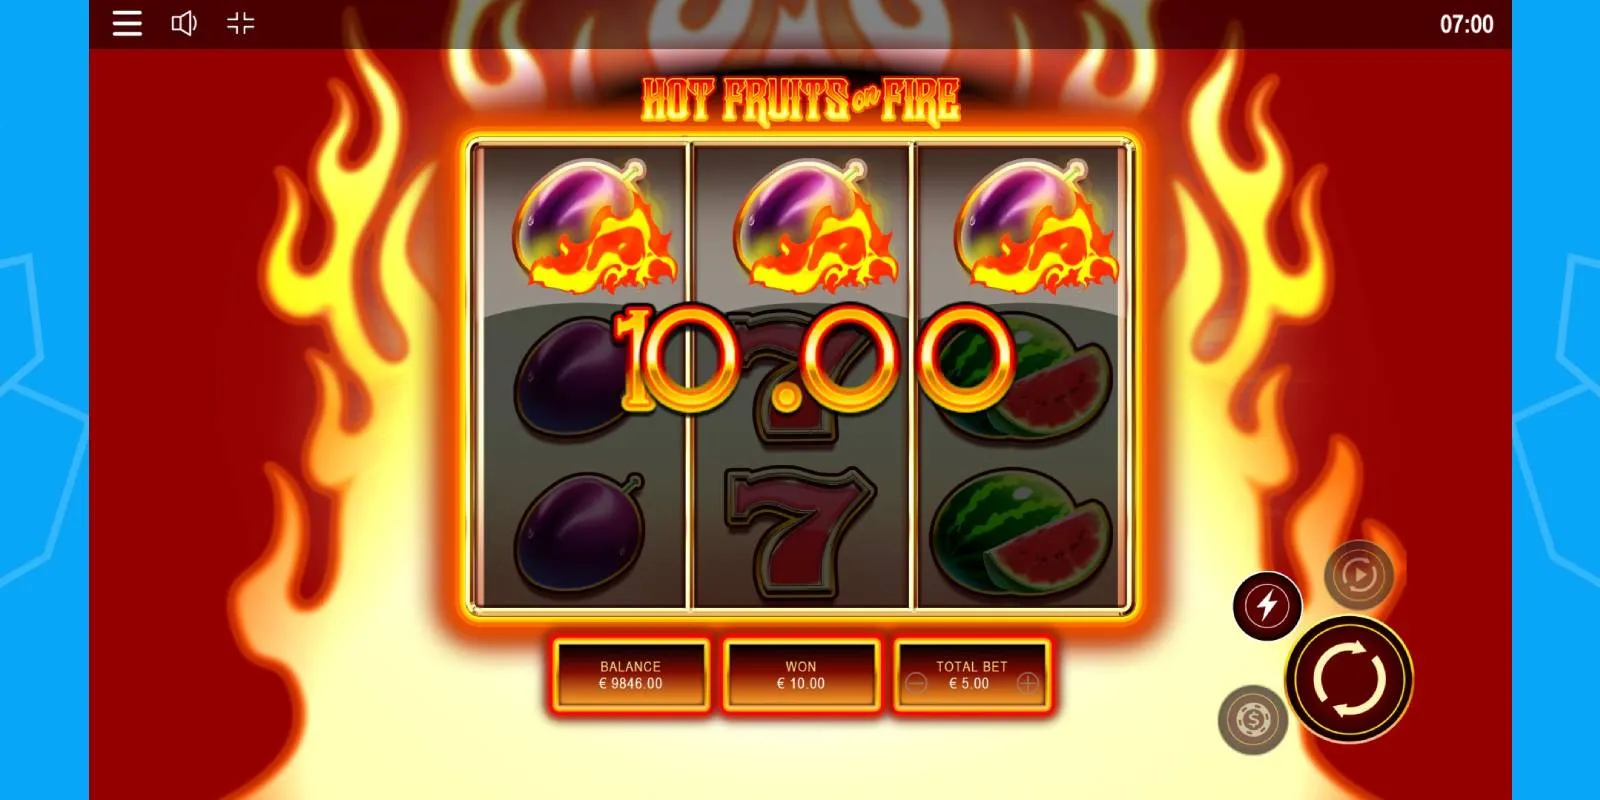 Play Hot Fruits on Fire online